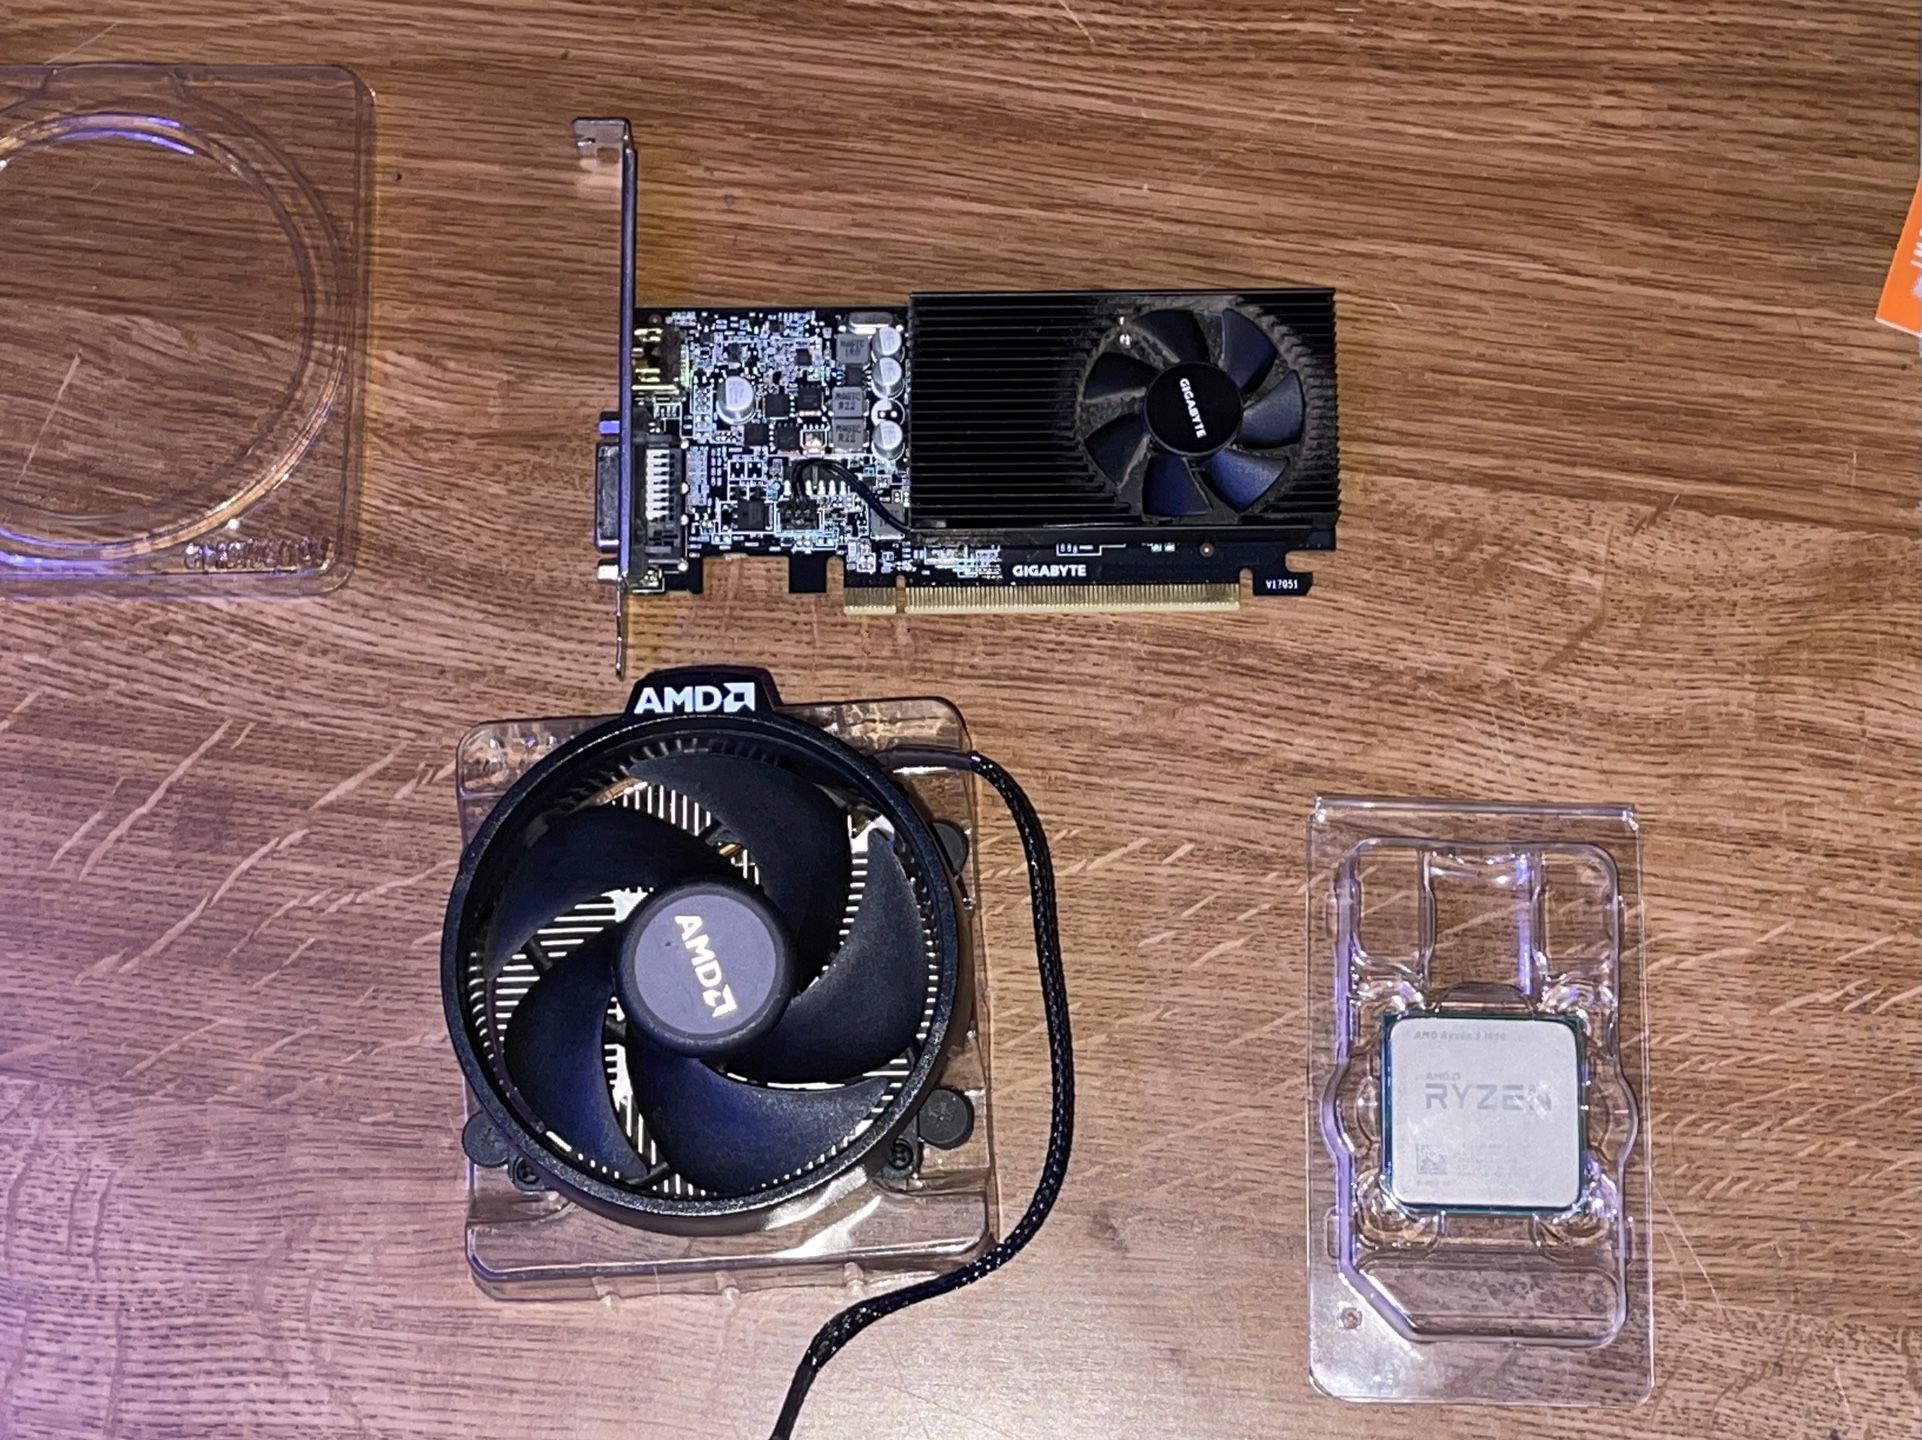 Graphics Card And CPU+Fan